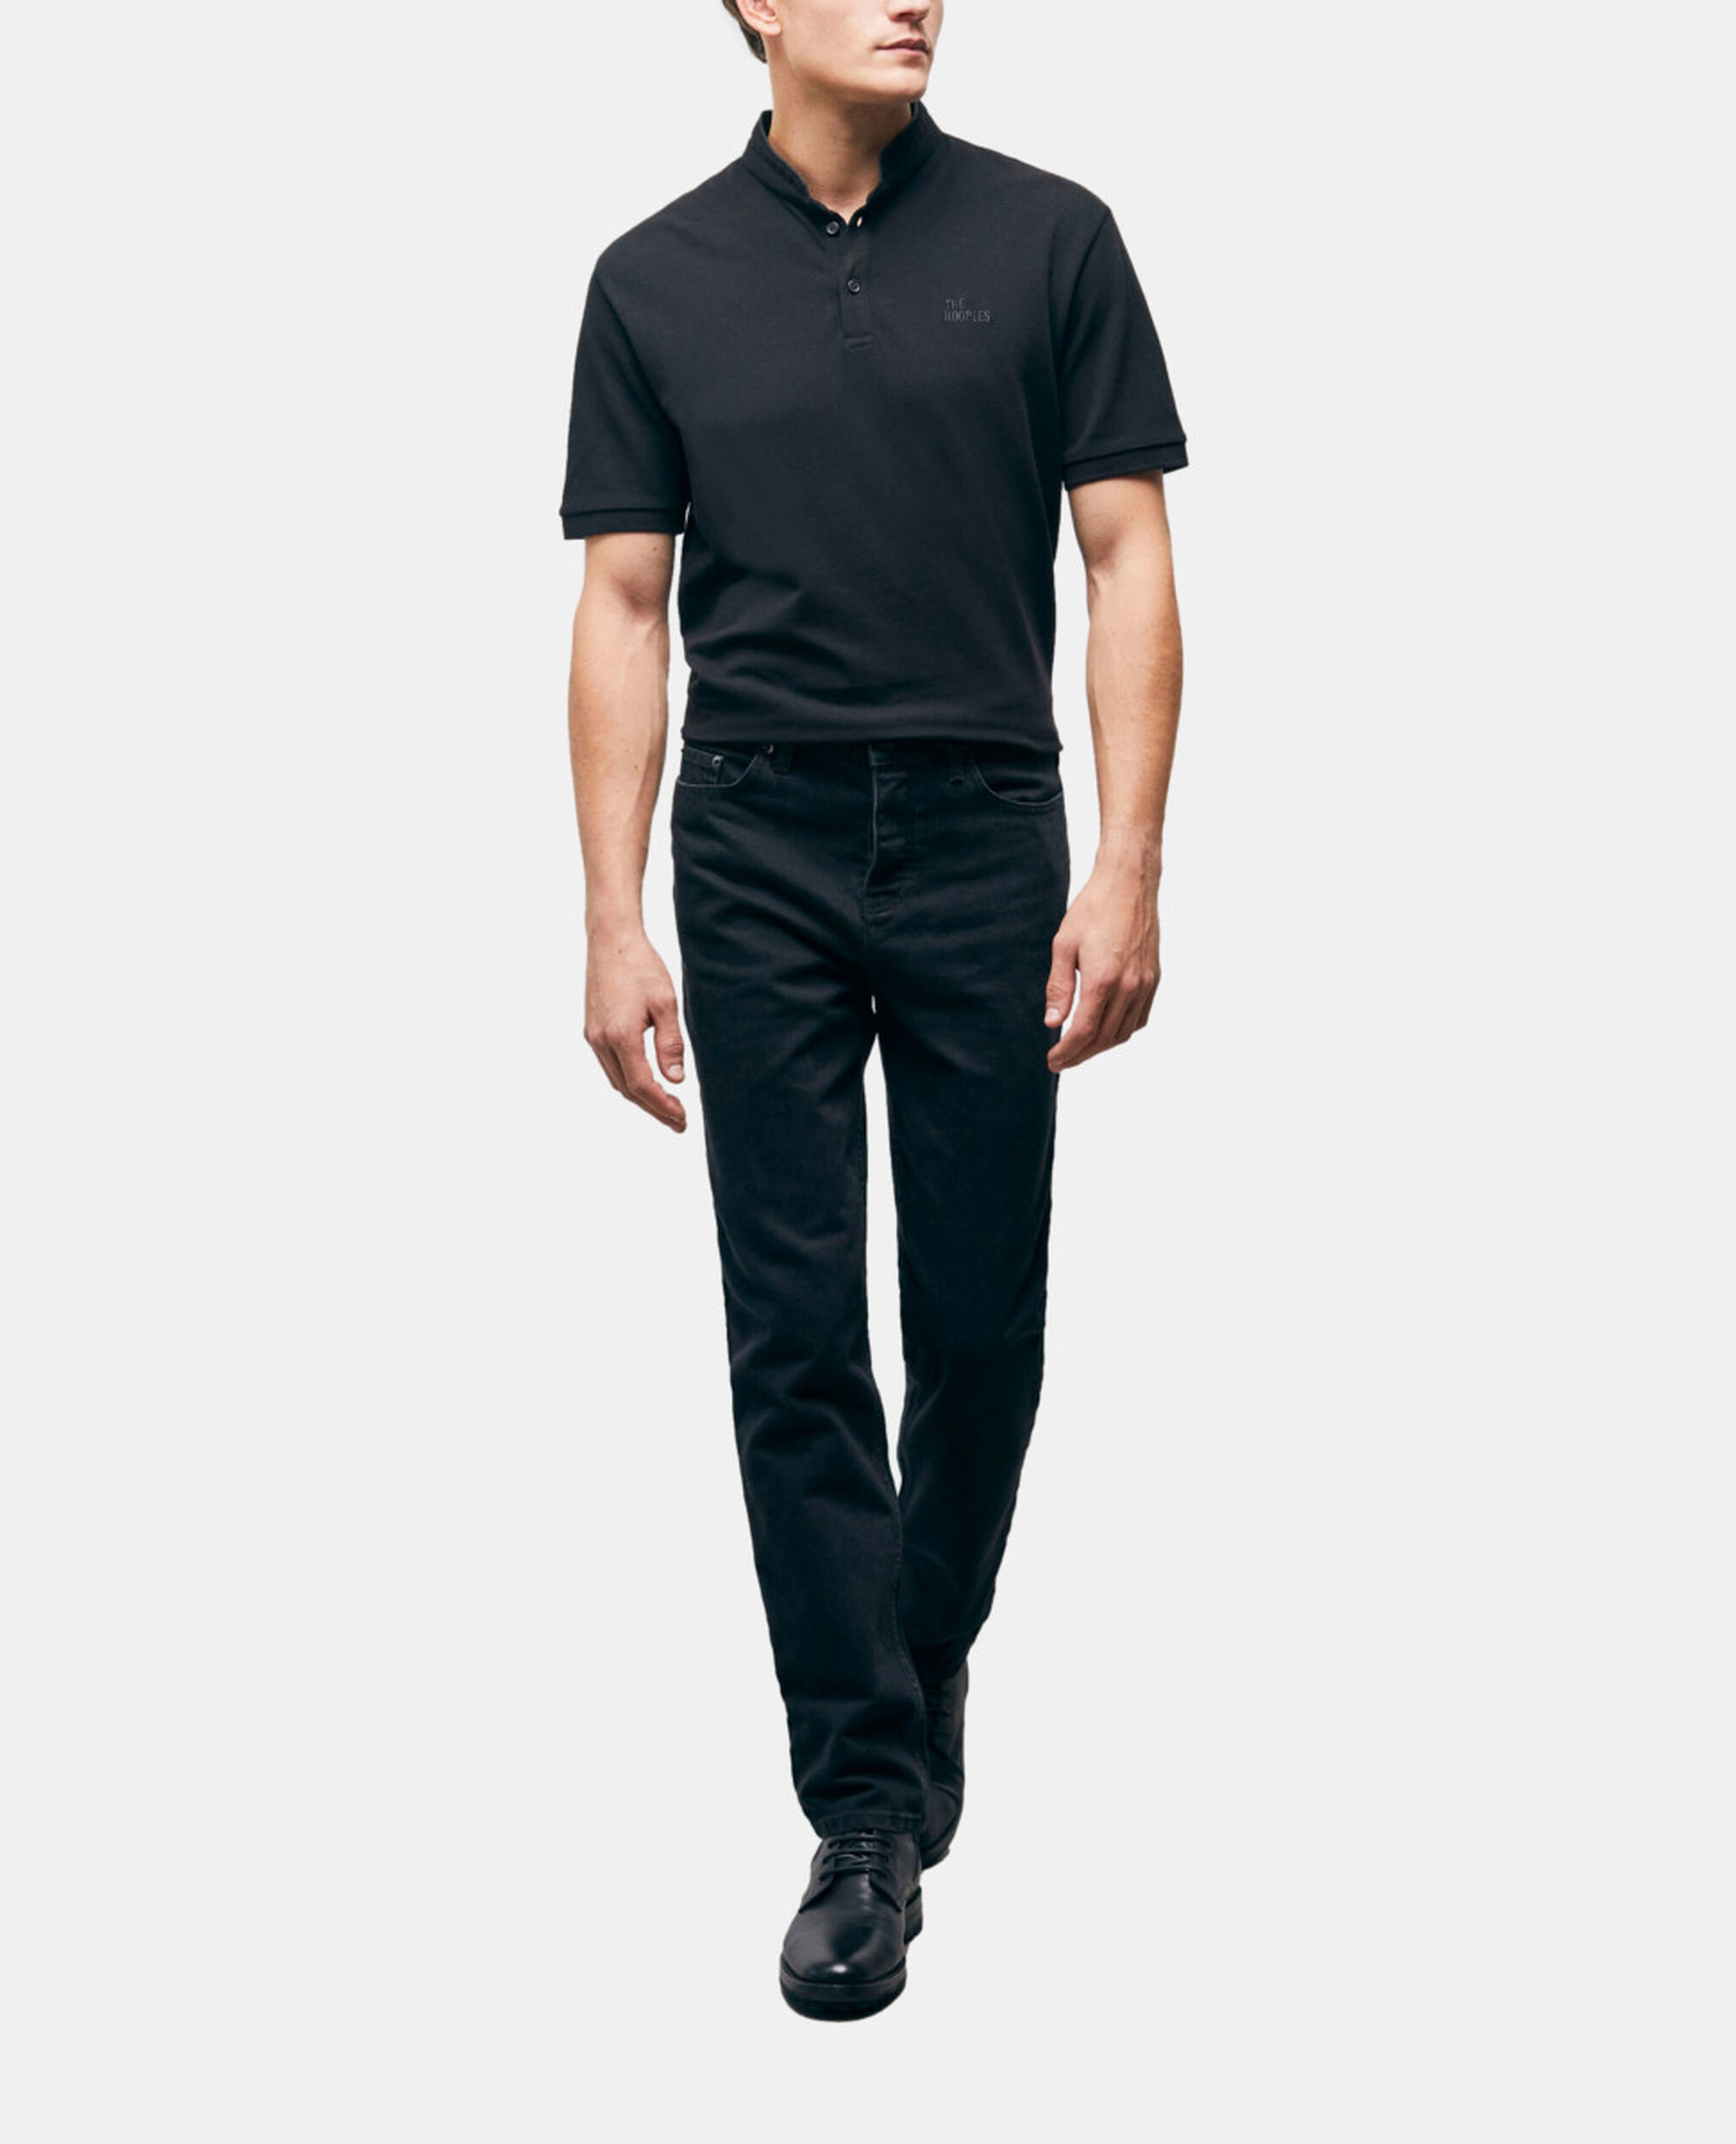 Camisa polo negra, BLACK, hi-res image number null